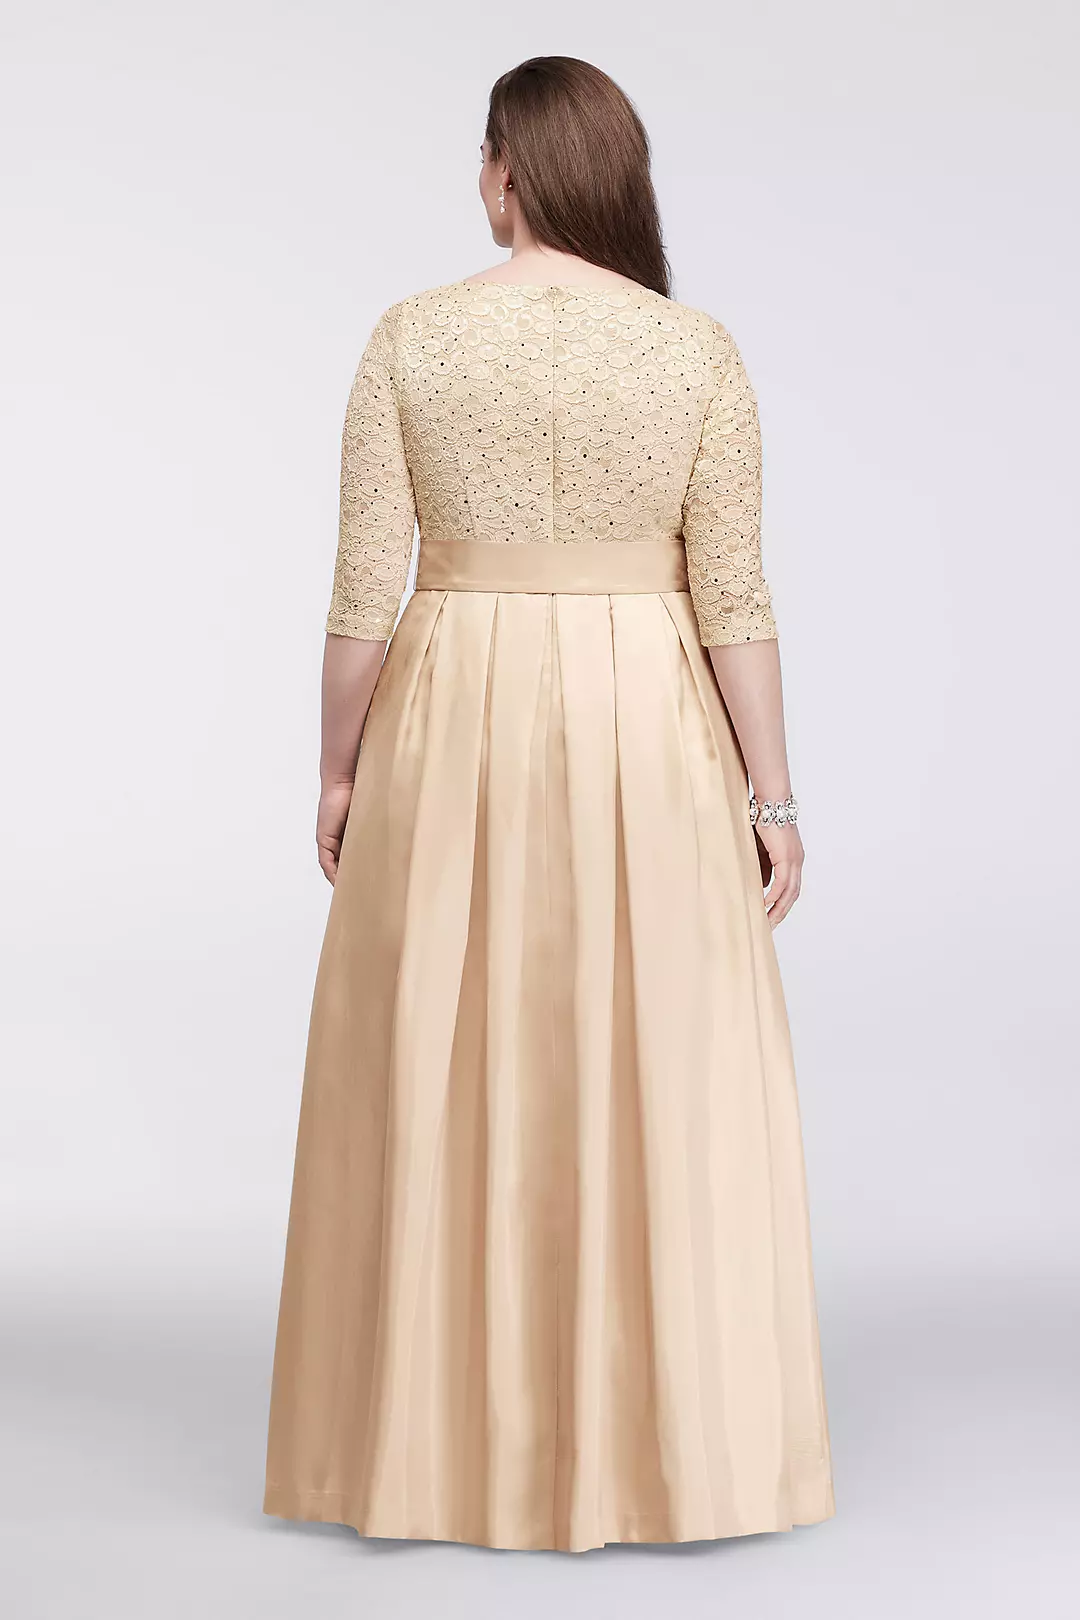 3/4 Shimmer Lace Sleeve Dress with Shantung Skirt Image 2